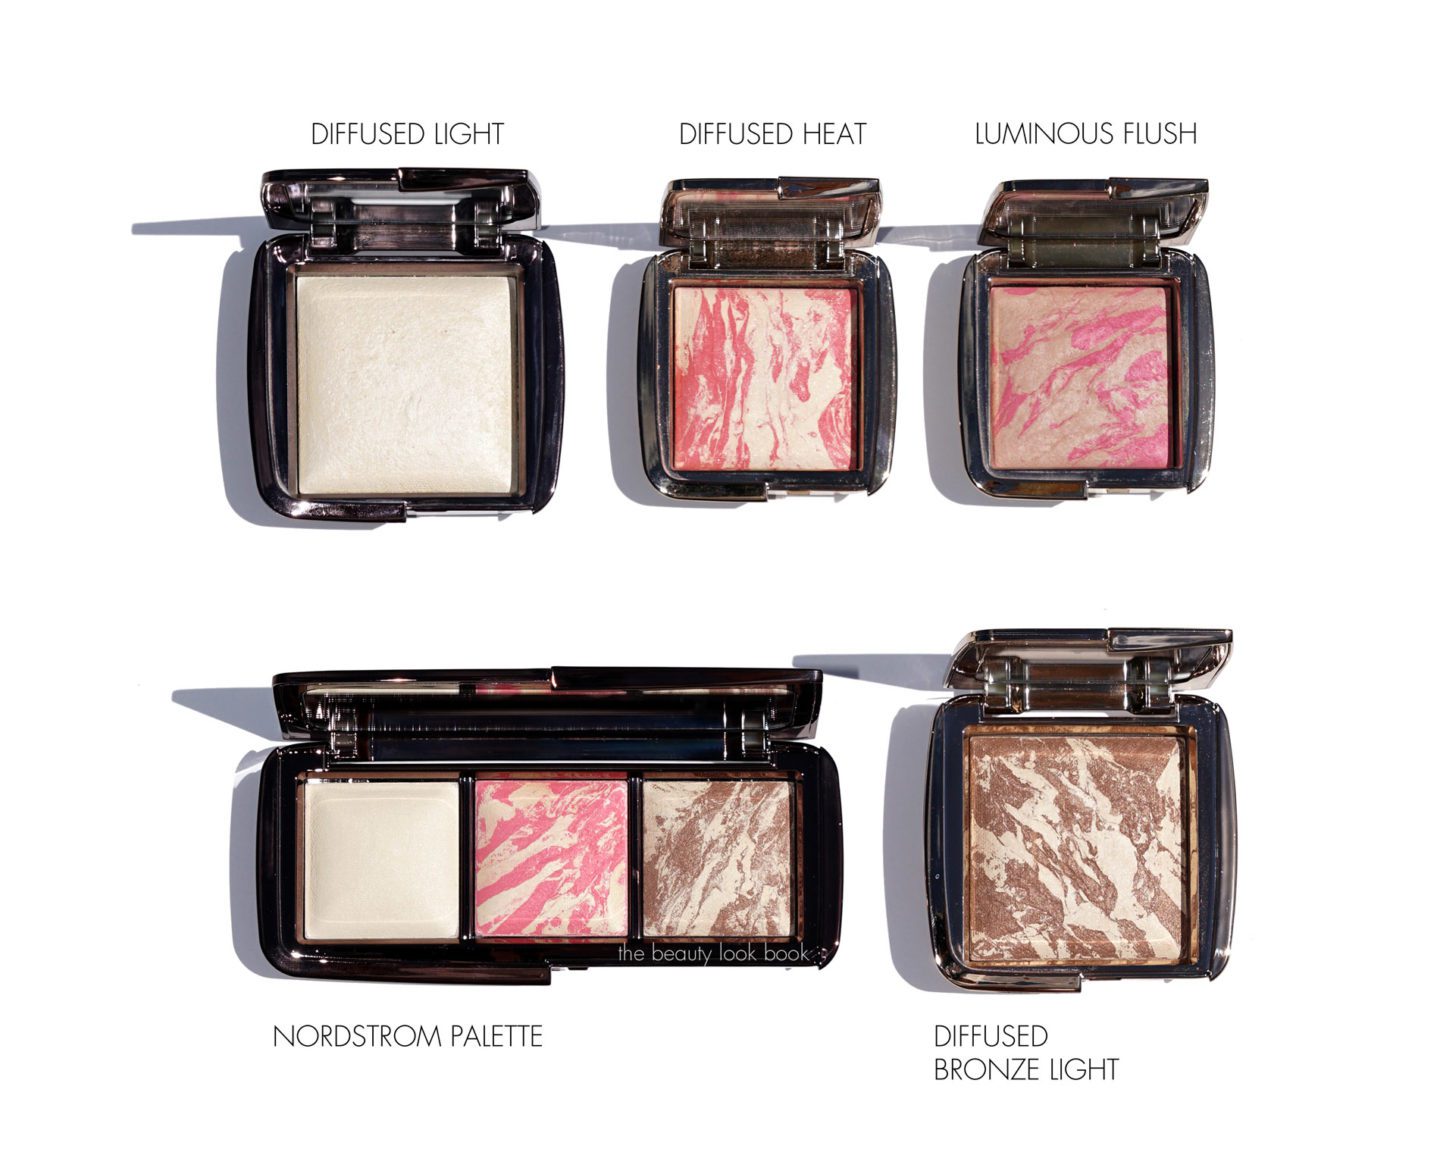 Hourglass Ambient Diffused Light Palette swatches vs individuals | The Beauty Look Book